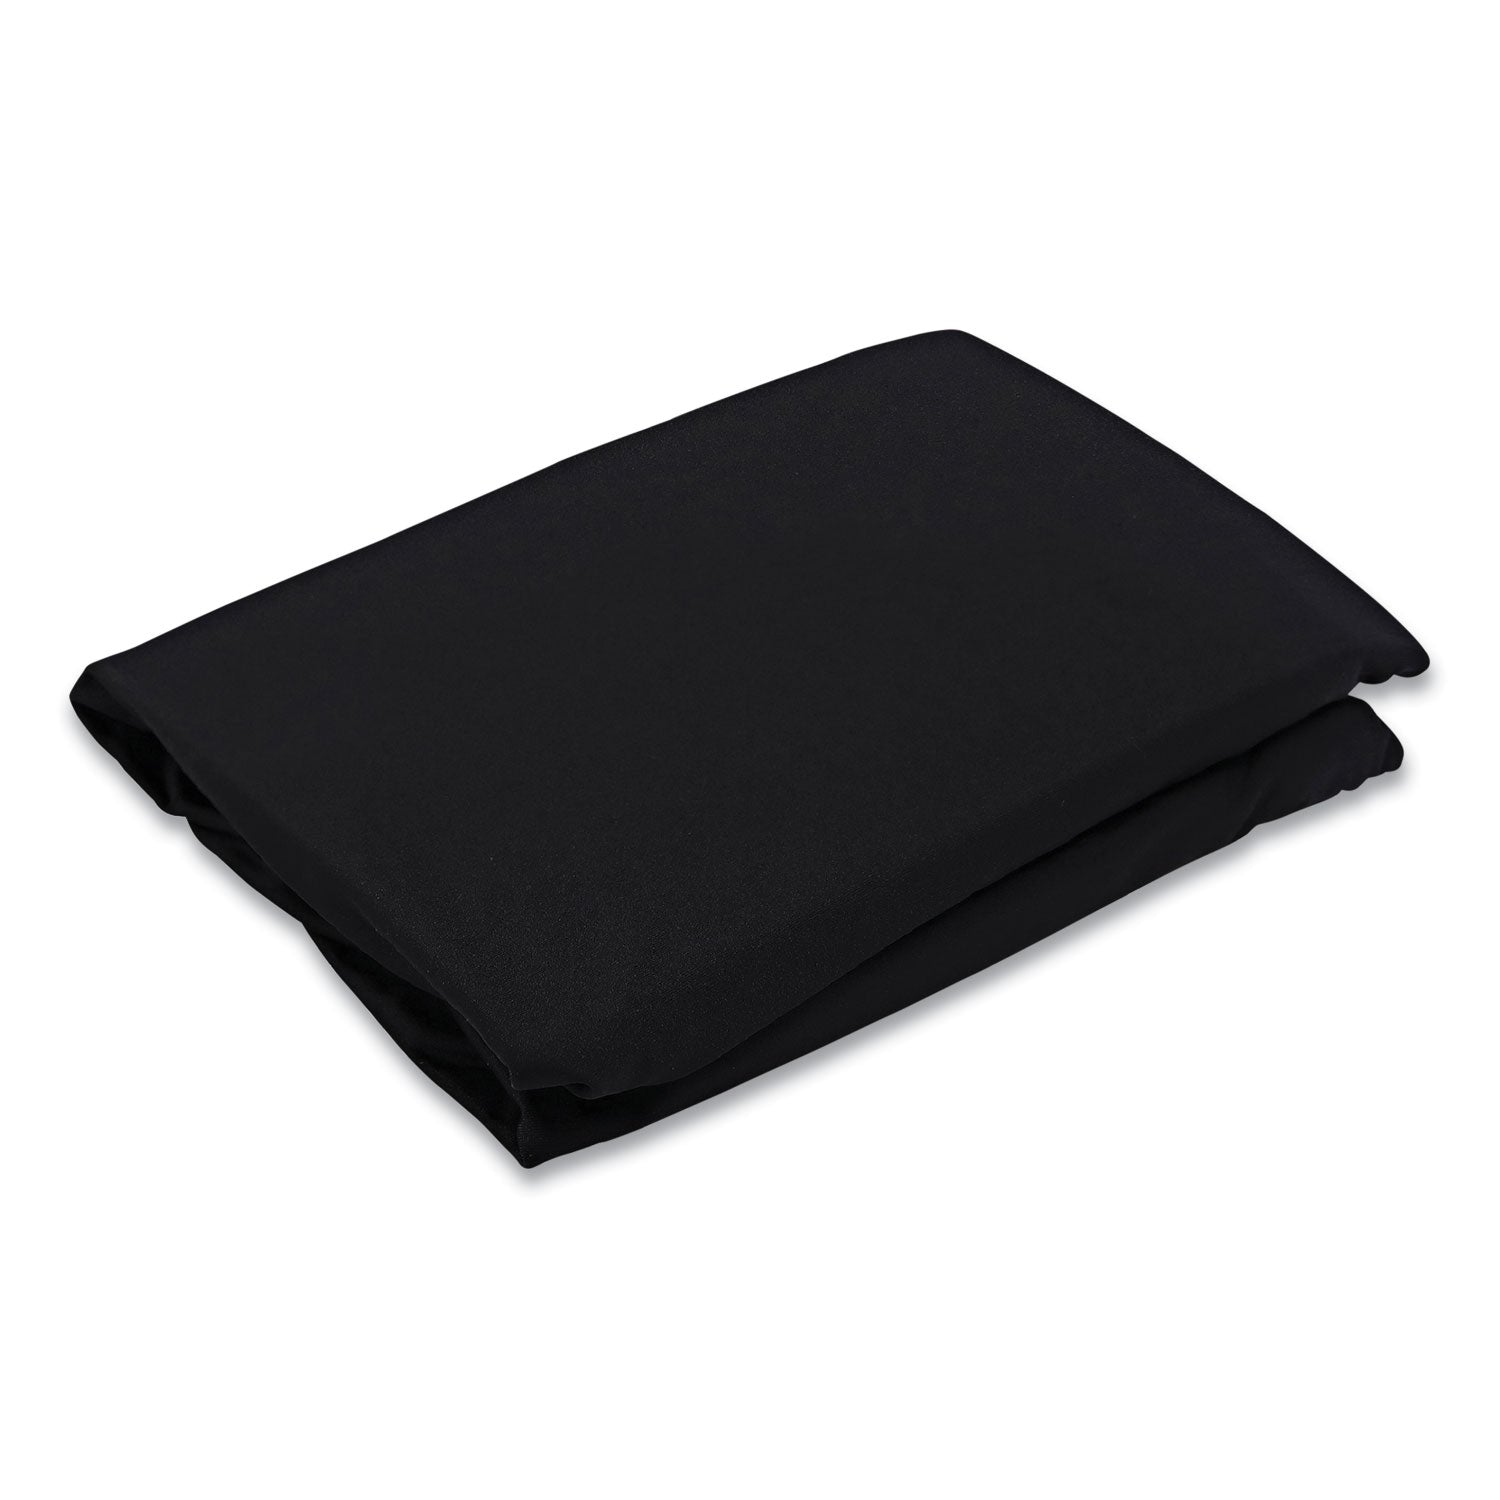 igear-fabric-table-top-cap-cover-polyester-30-x-96-black_ice16631 - 7